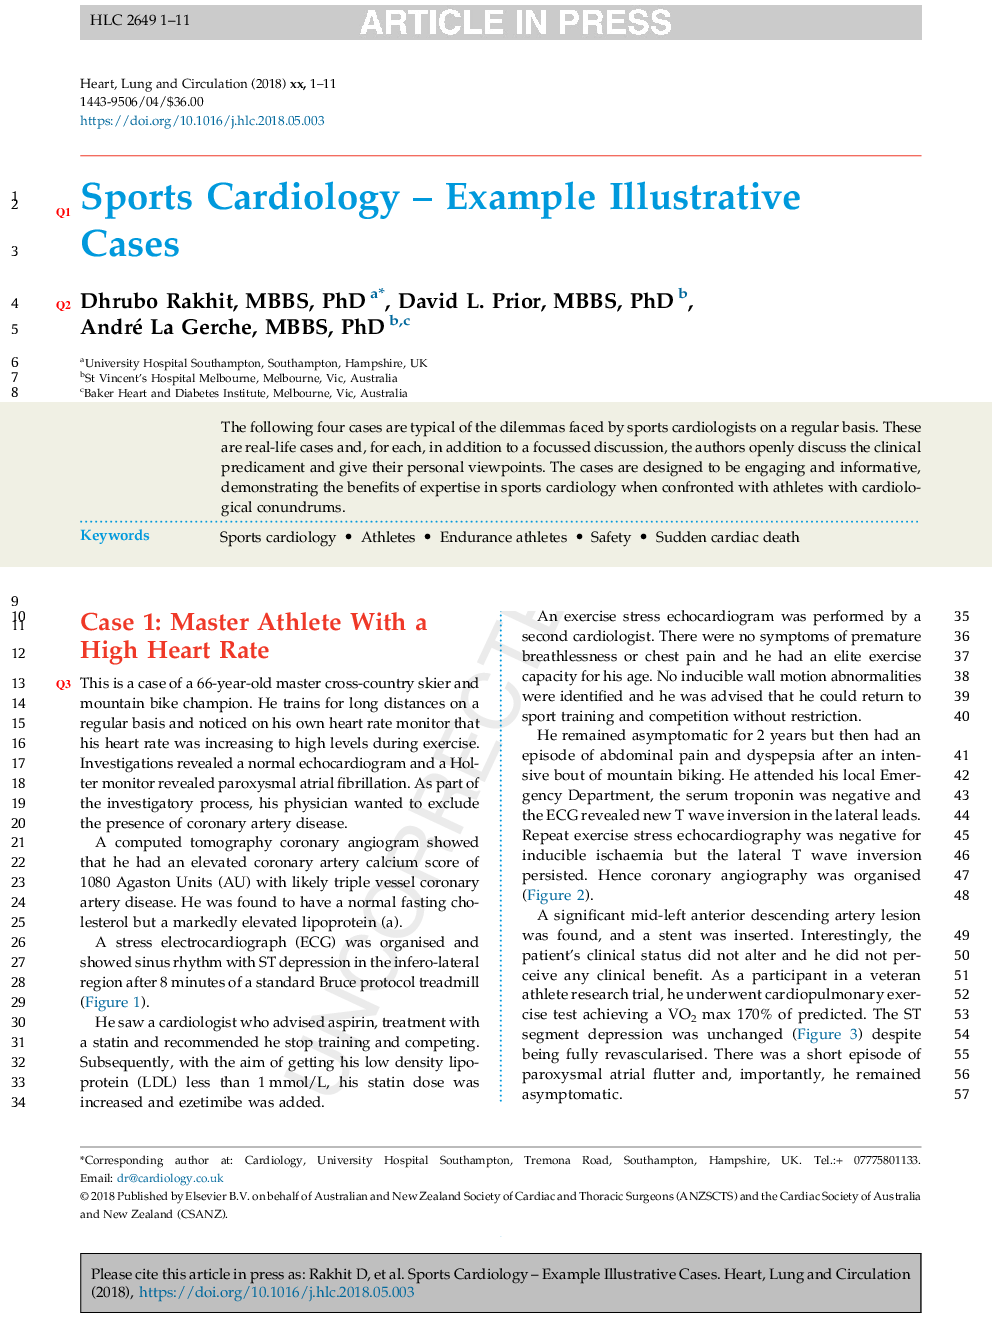 Sports Cardiology - Example Illustrative Cases